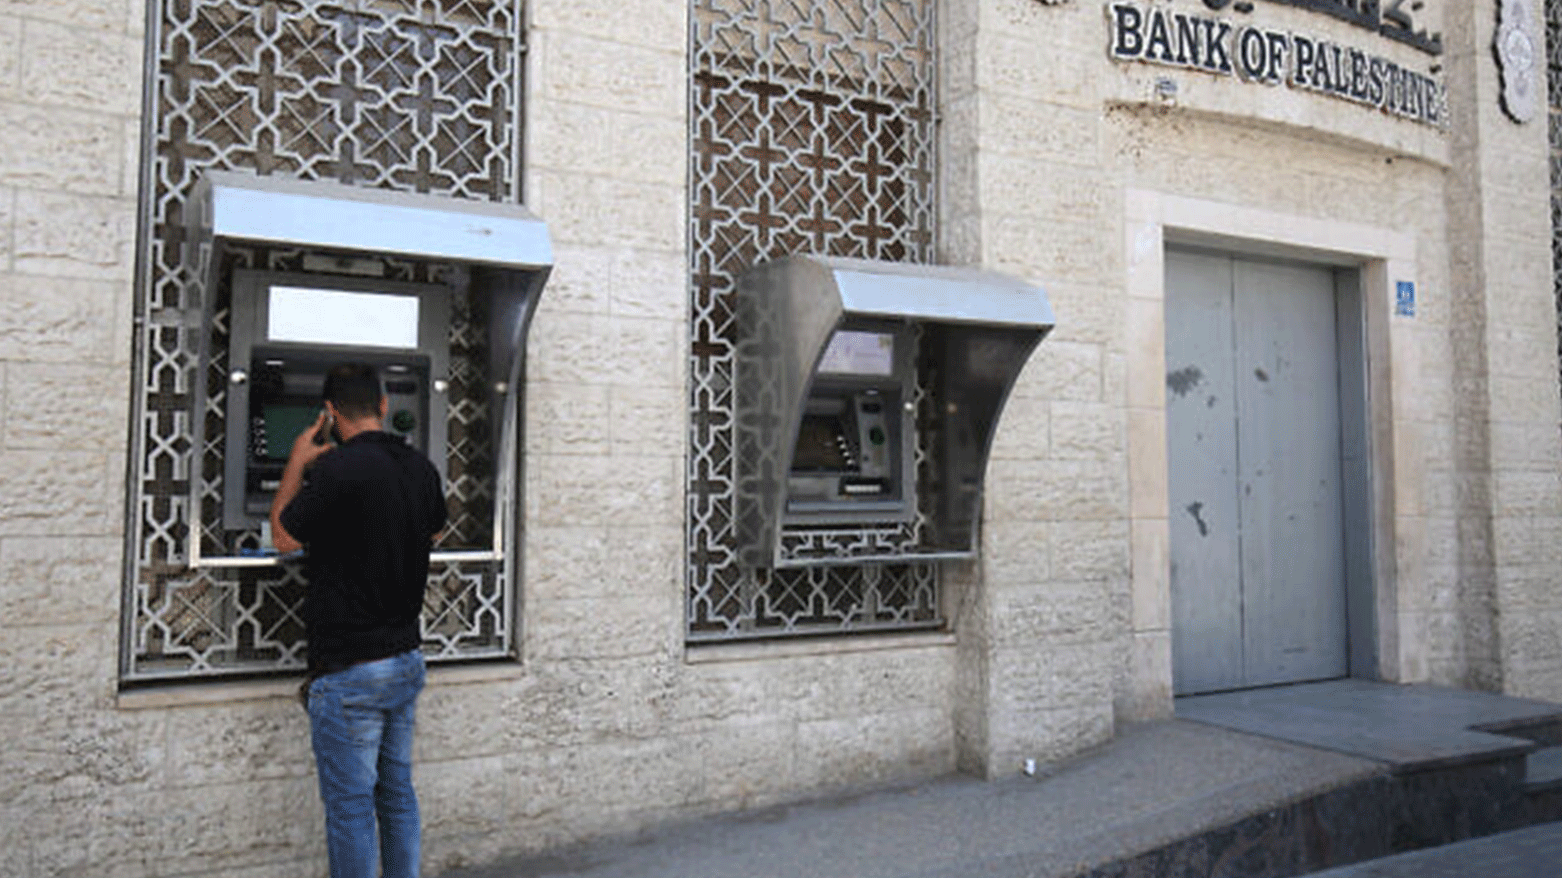 A man withdraws cash from an ATM machine at Bank of Palestine in Khan Younis in the southern Gaza Strip, May 15, 2018. (Photo: AFP)